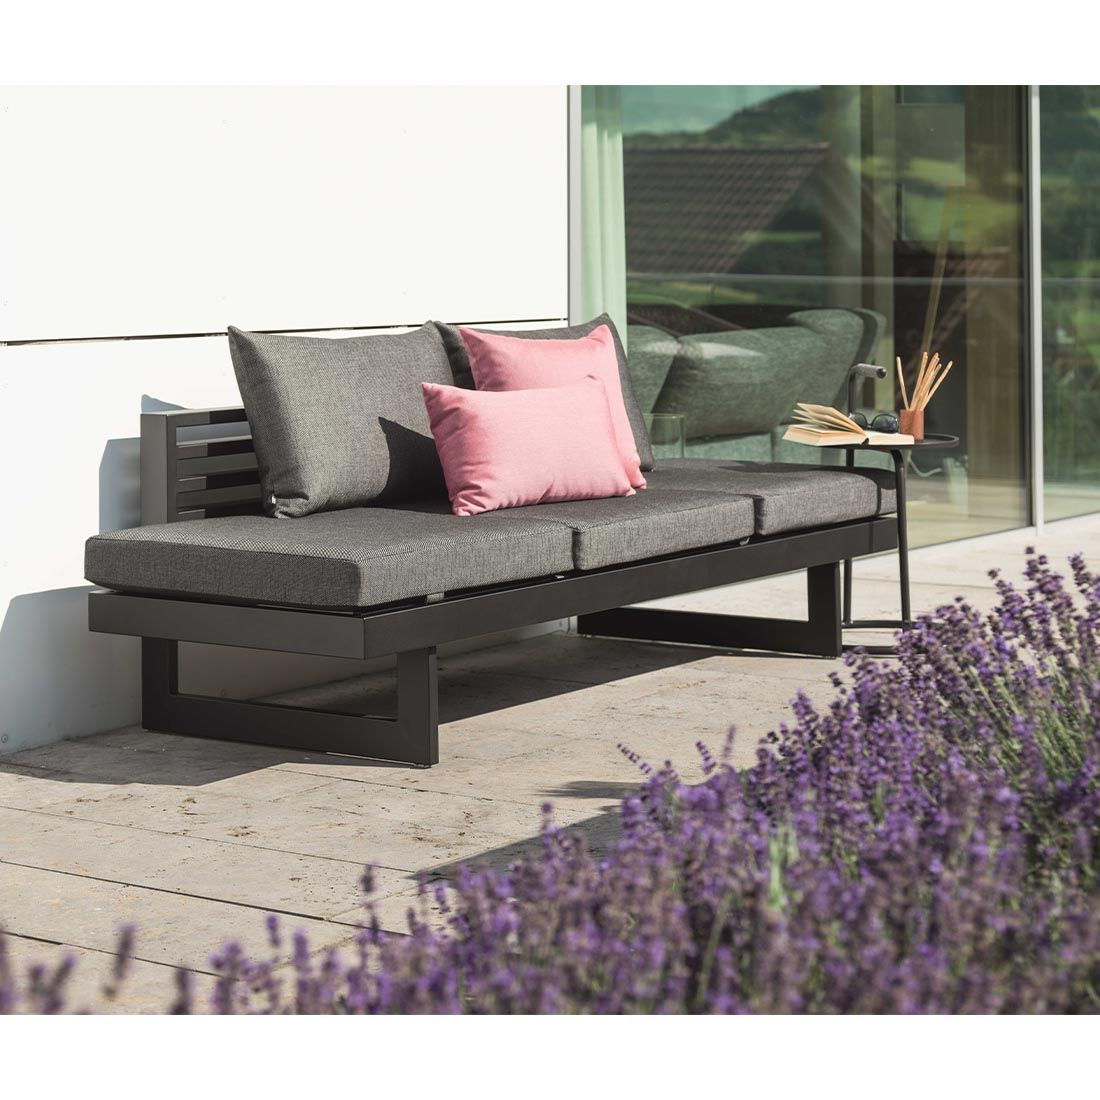 Stern New Holly Lounge/Liege Aluminium/Outdoorstoff